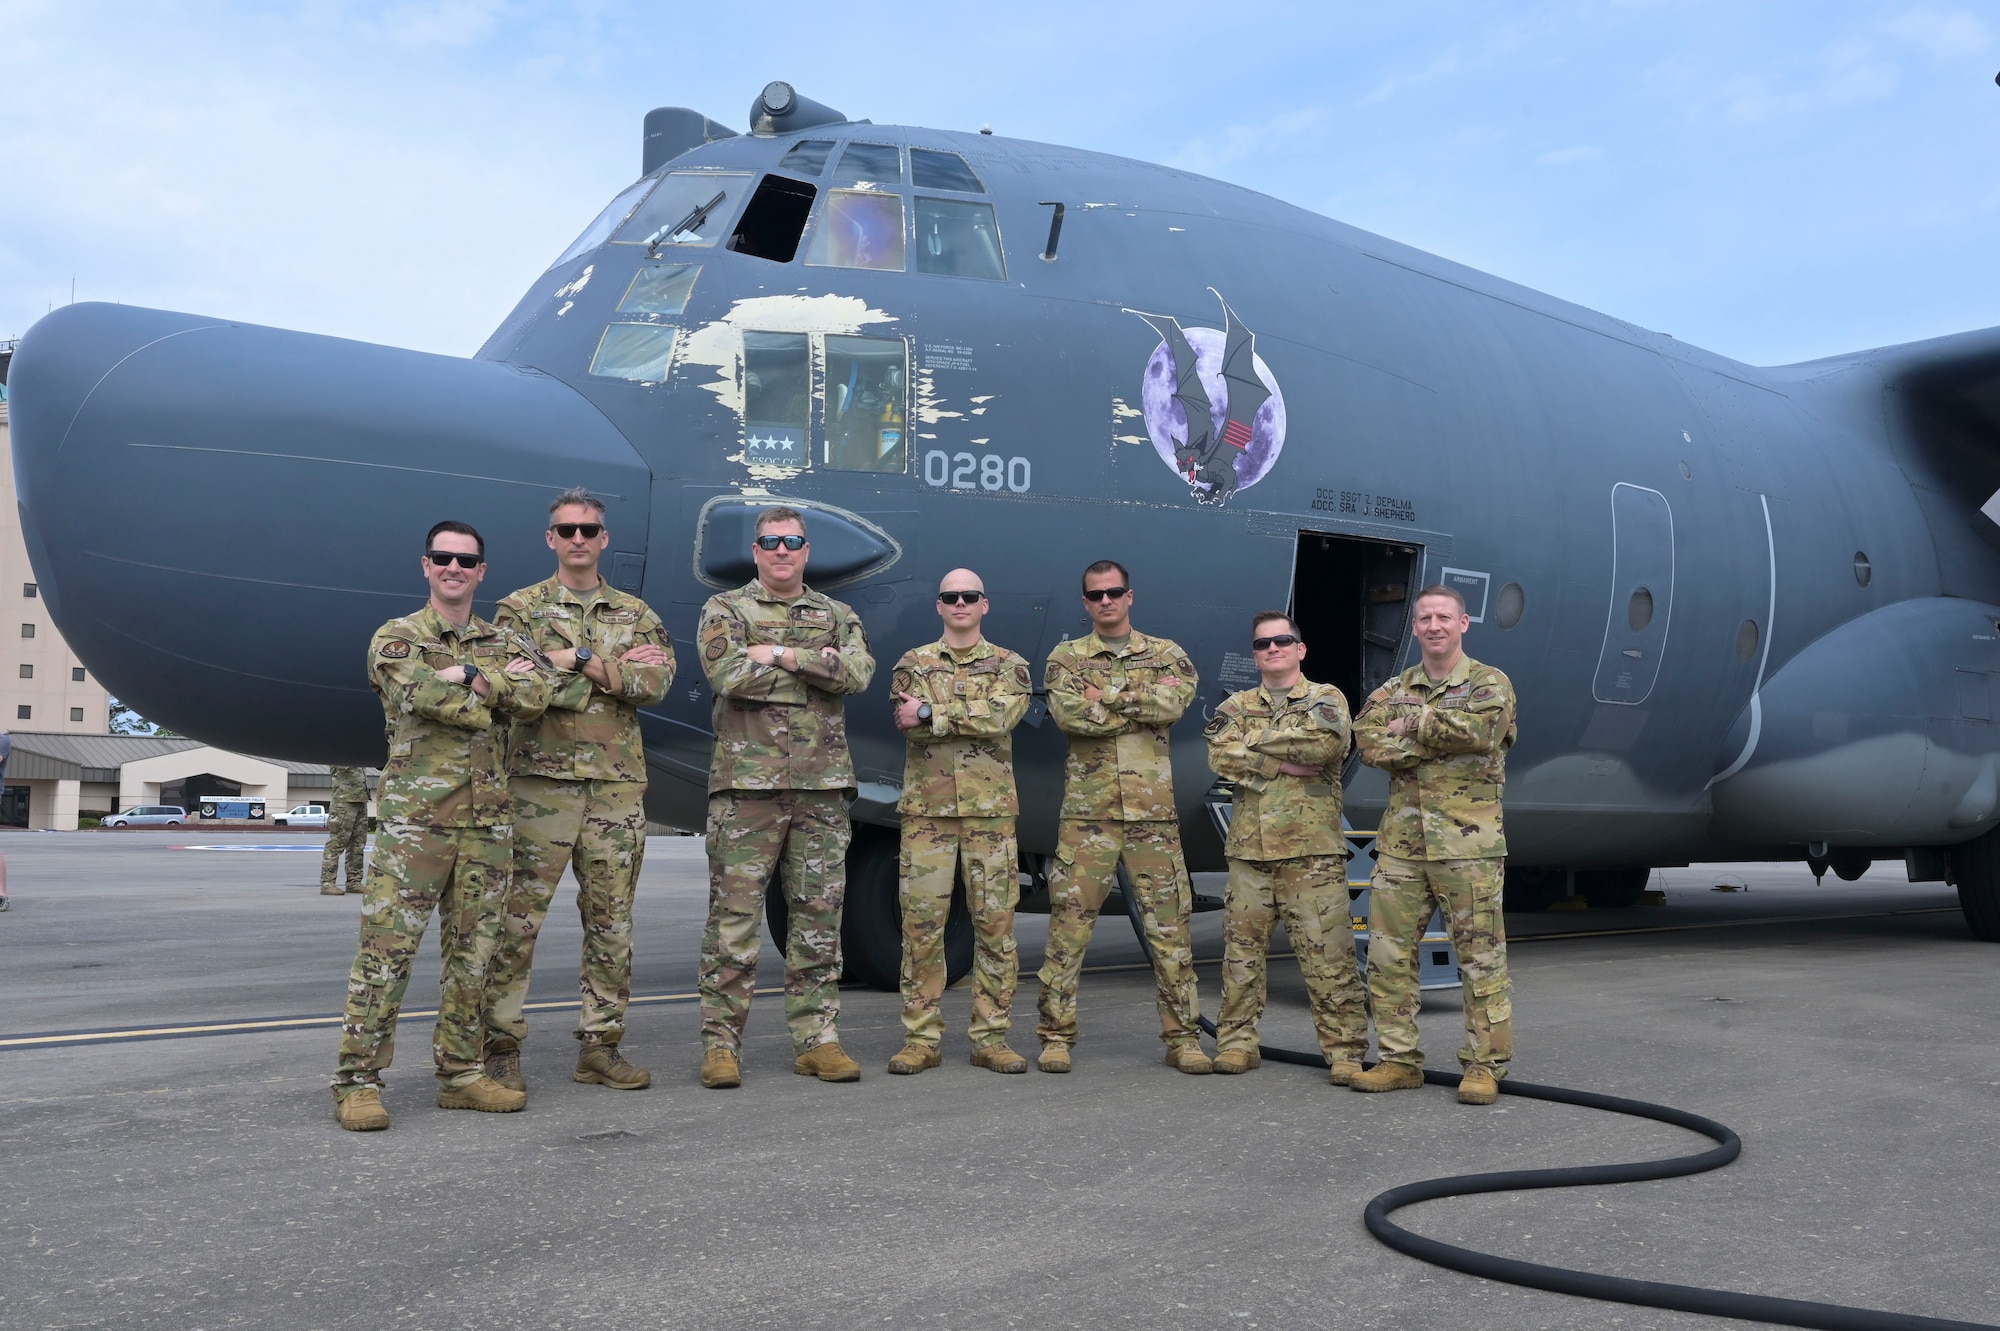 On Sunday, April 2, members of the Talon community gathered at Hurlburt Field, to see MC-130H, Tail Number 89-0280, take off for the last time.